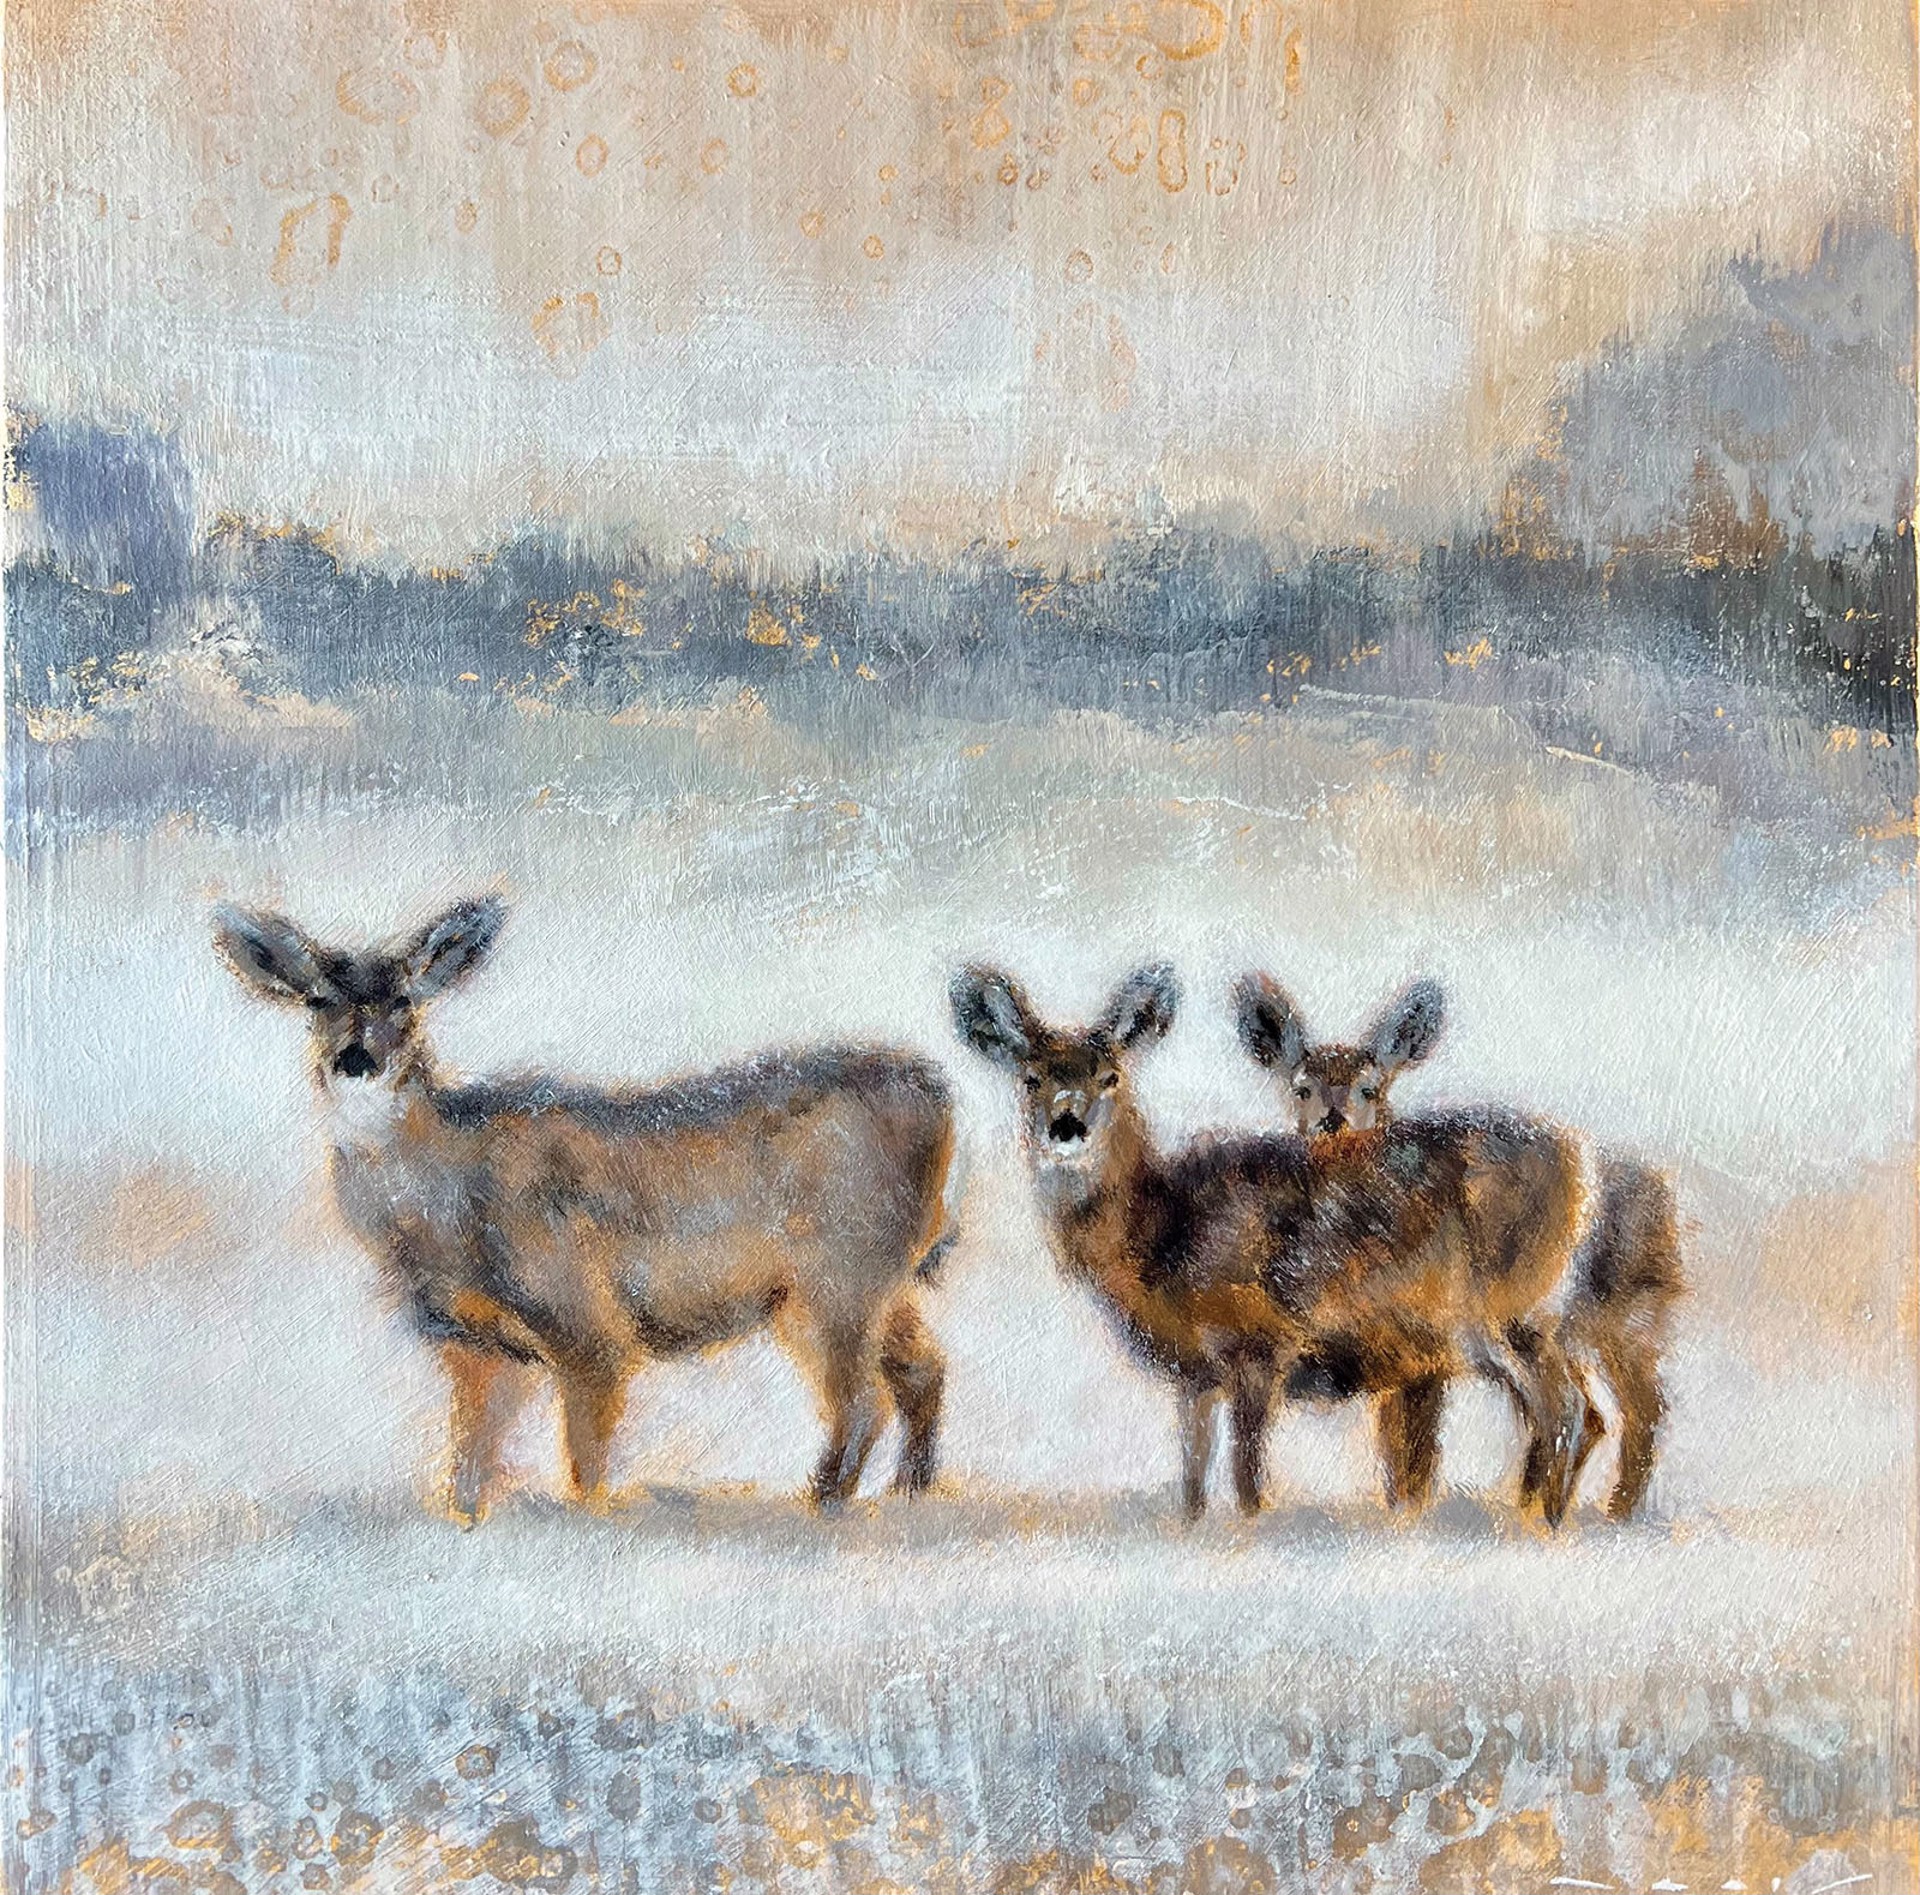 Original Mixed Media Painting By Nealy Riley Featuring Deer In Winter Landscape